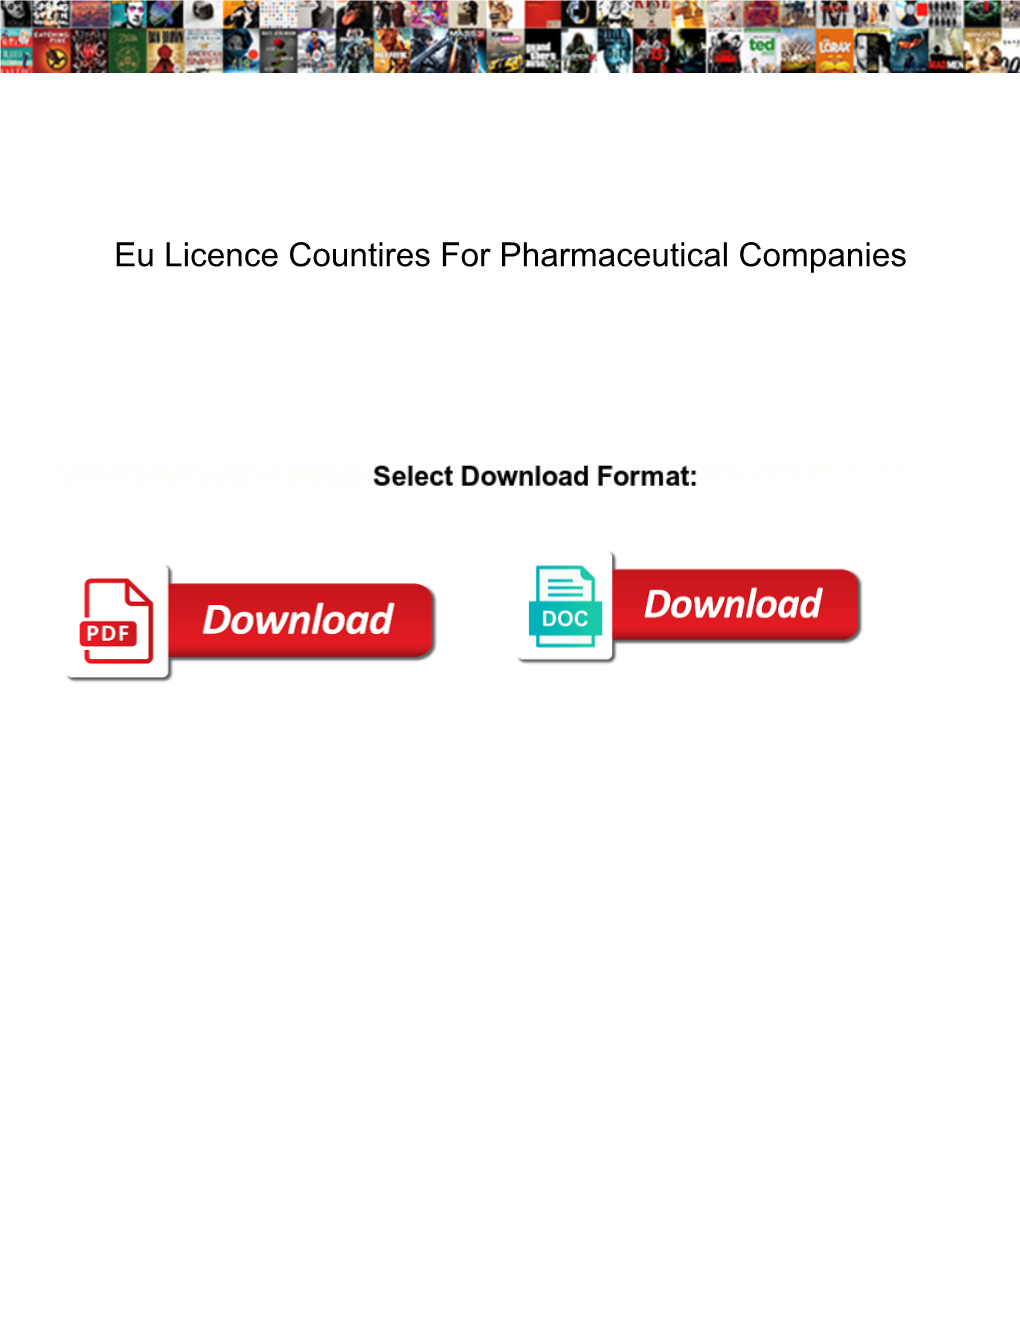 Eu Licence Countires for Pharmaceutical Companies